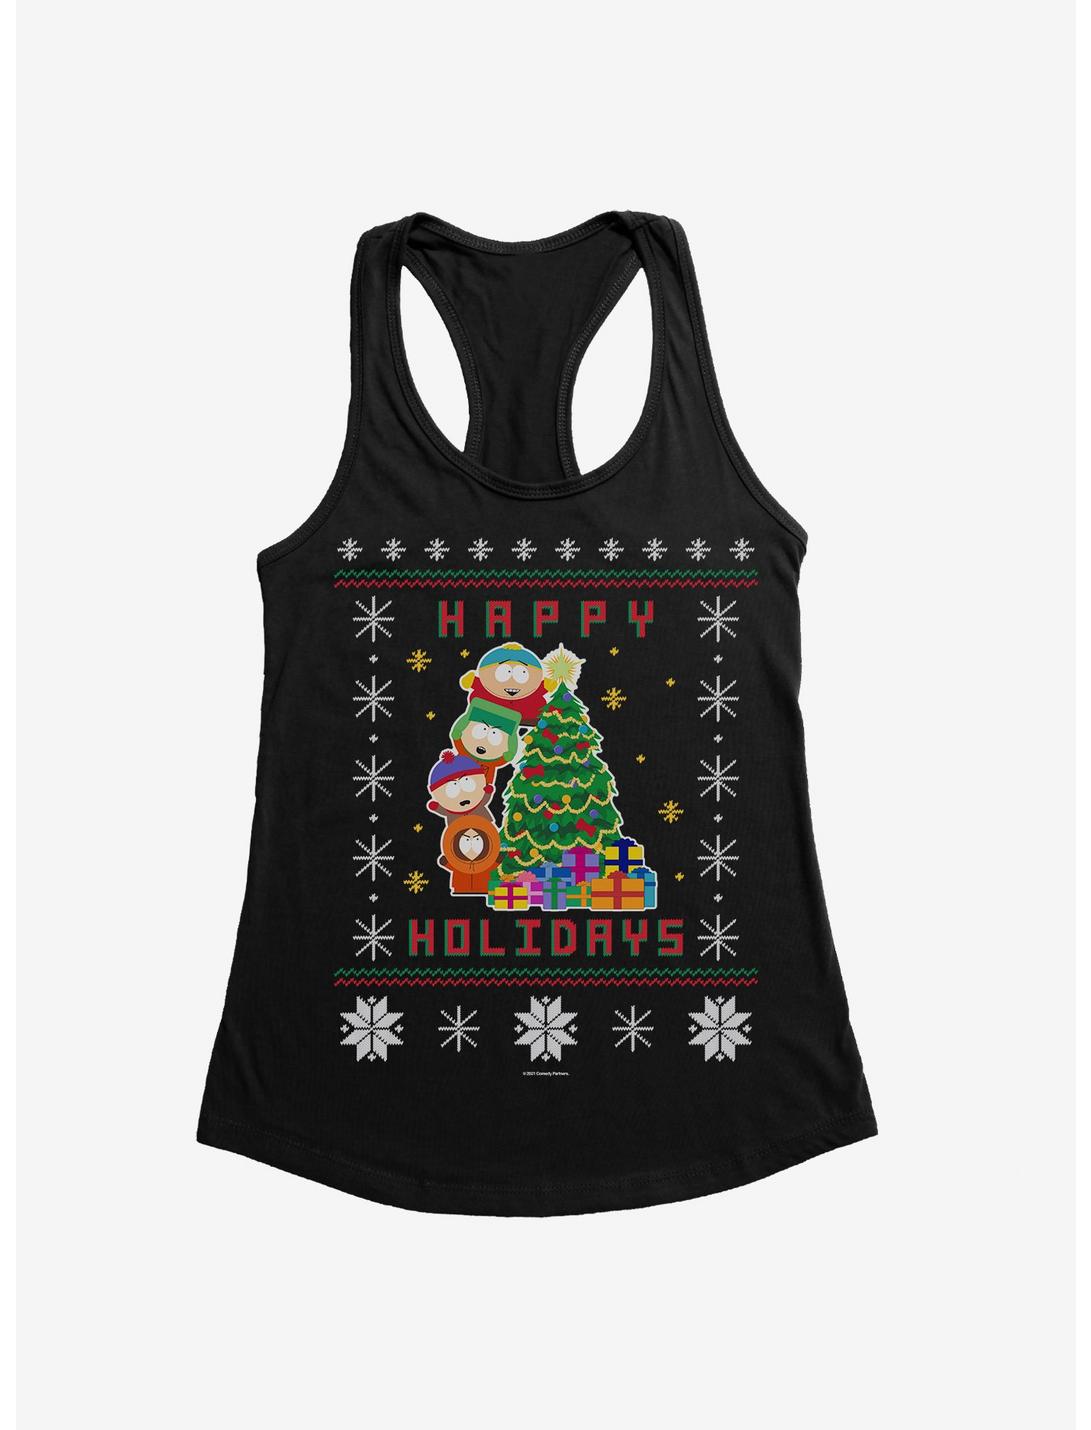 South Park Sweater All Crew Girls Tank, , hi-res